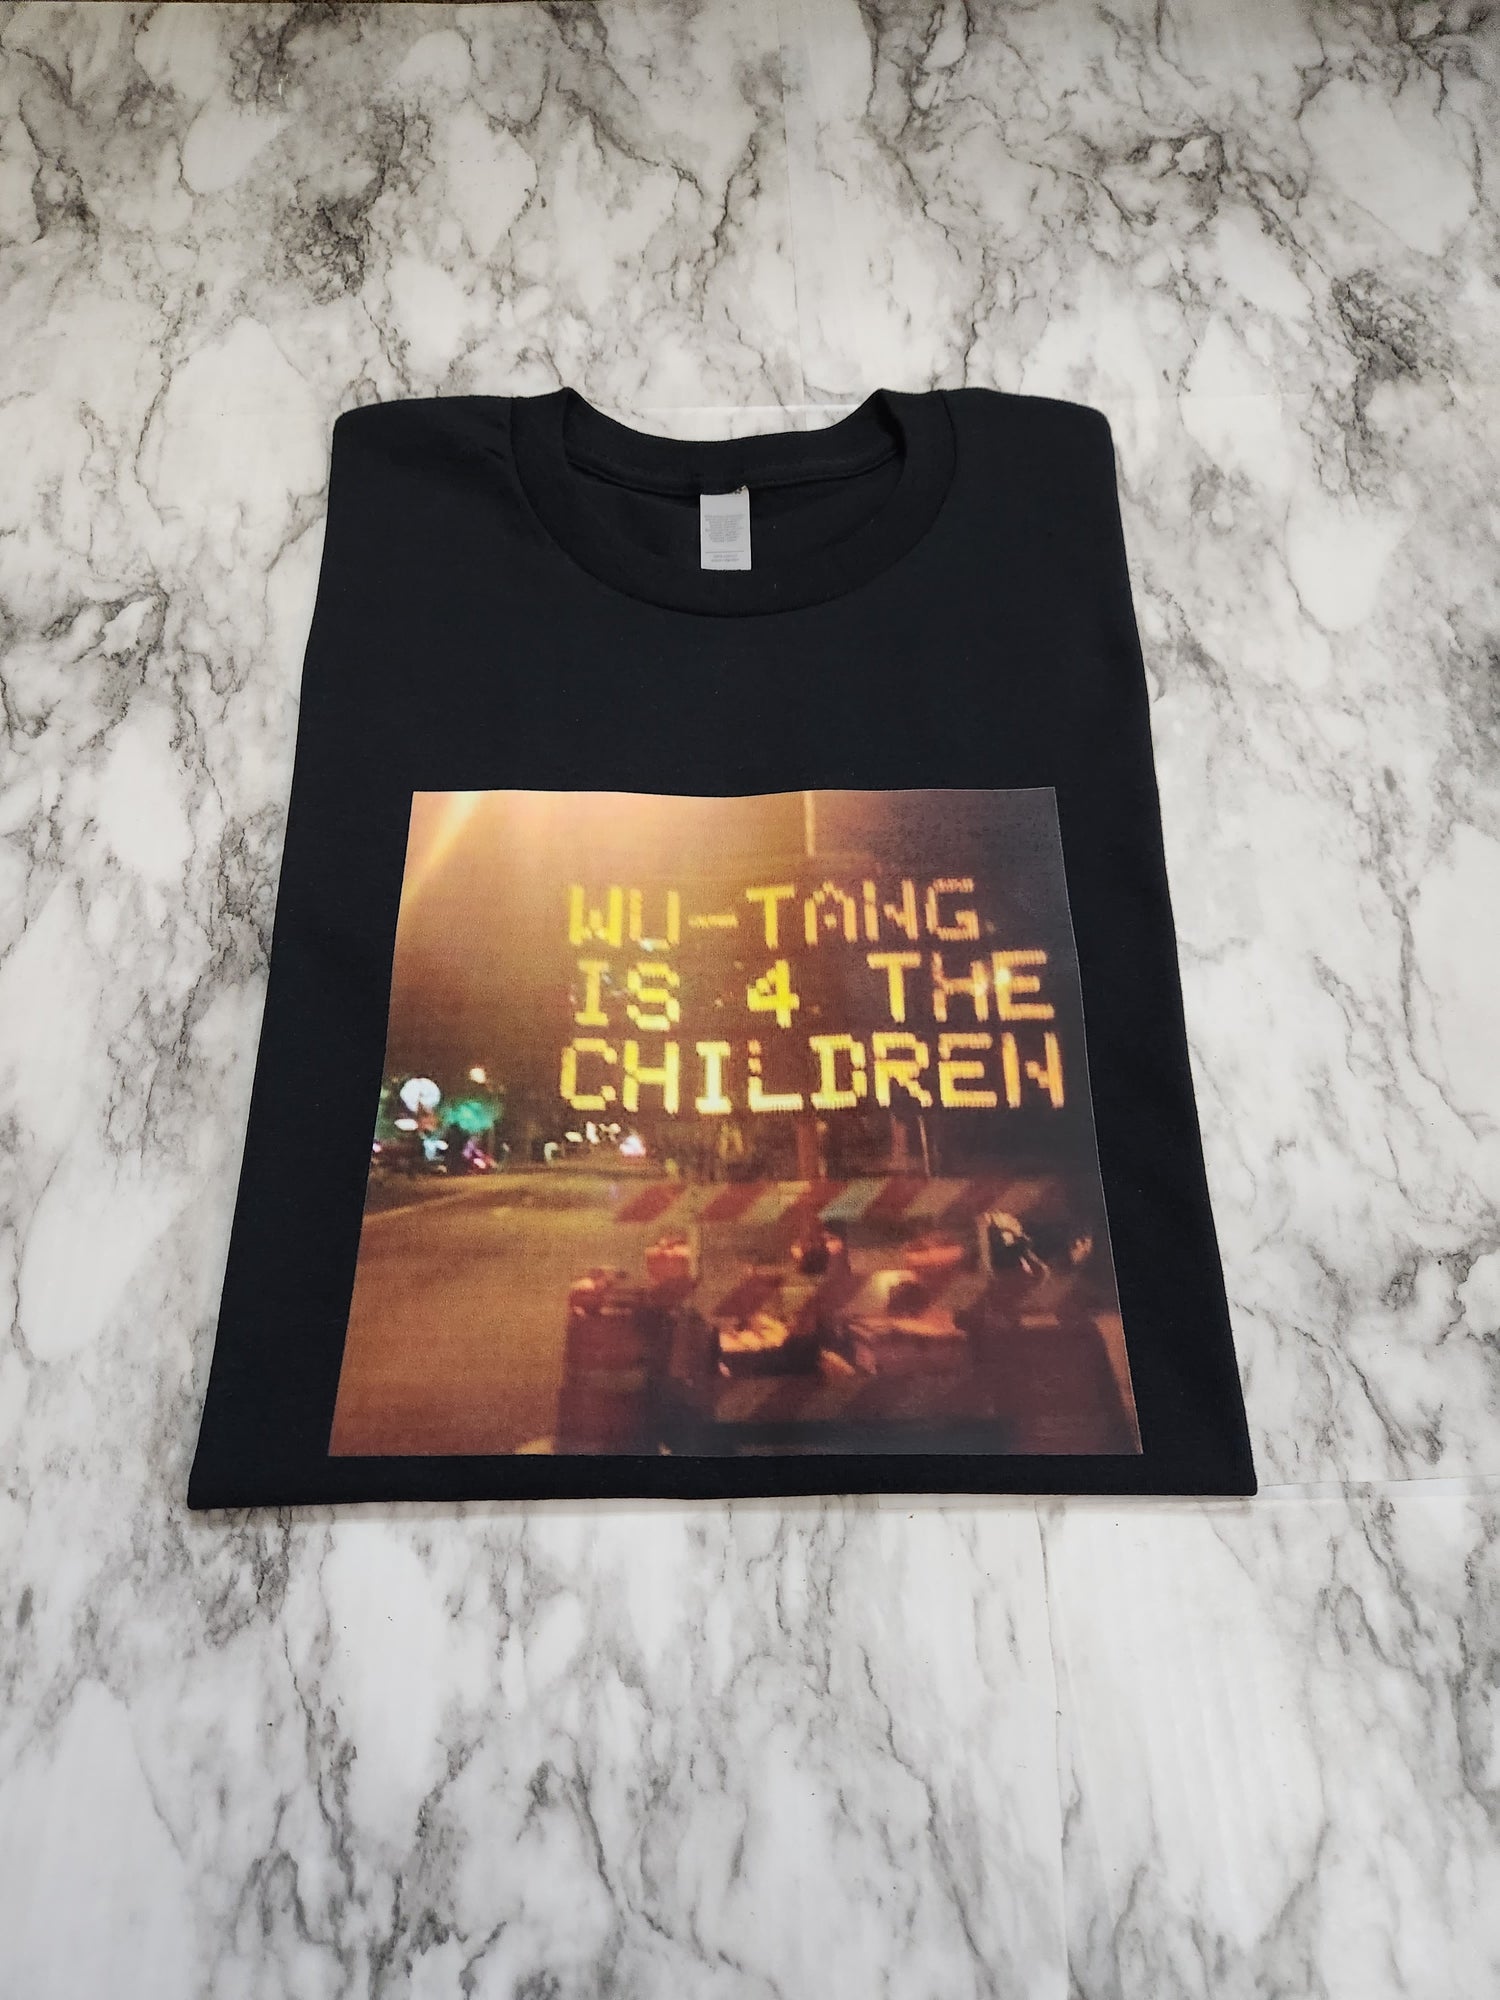 For The Children T-Shirt (Black) - Centre Ave Clothing Co.